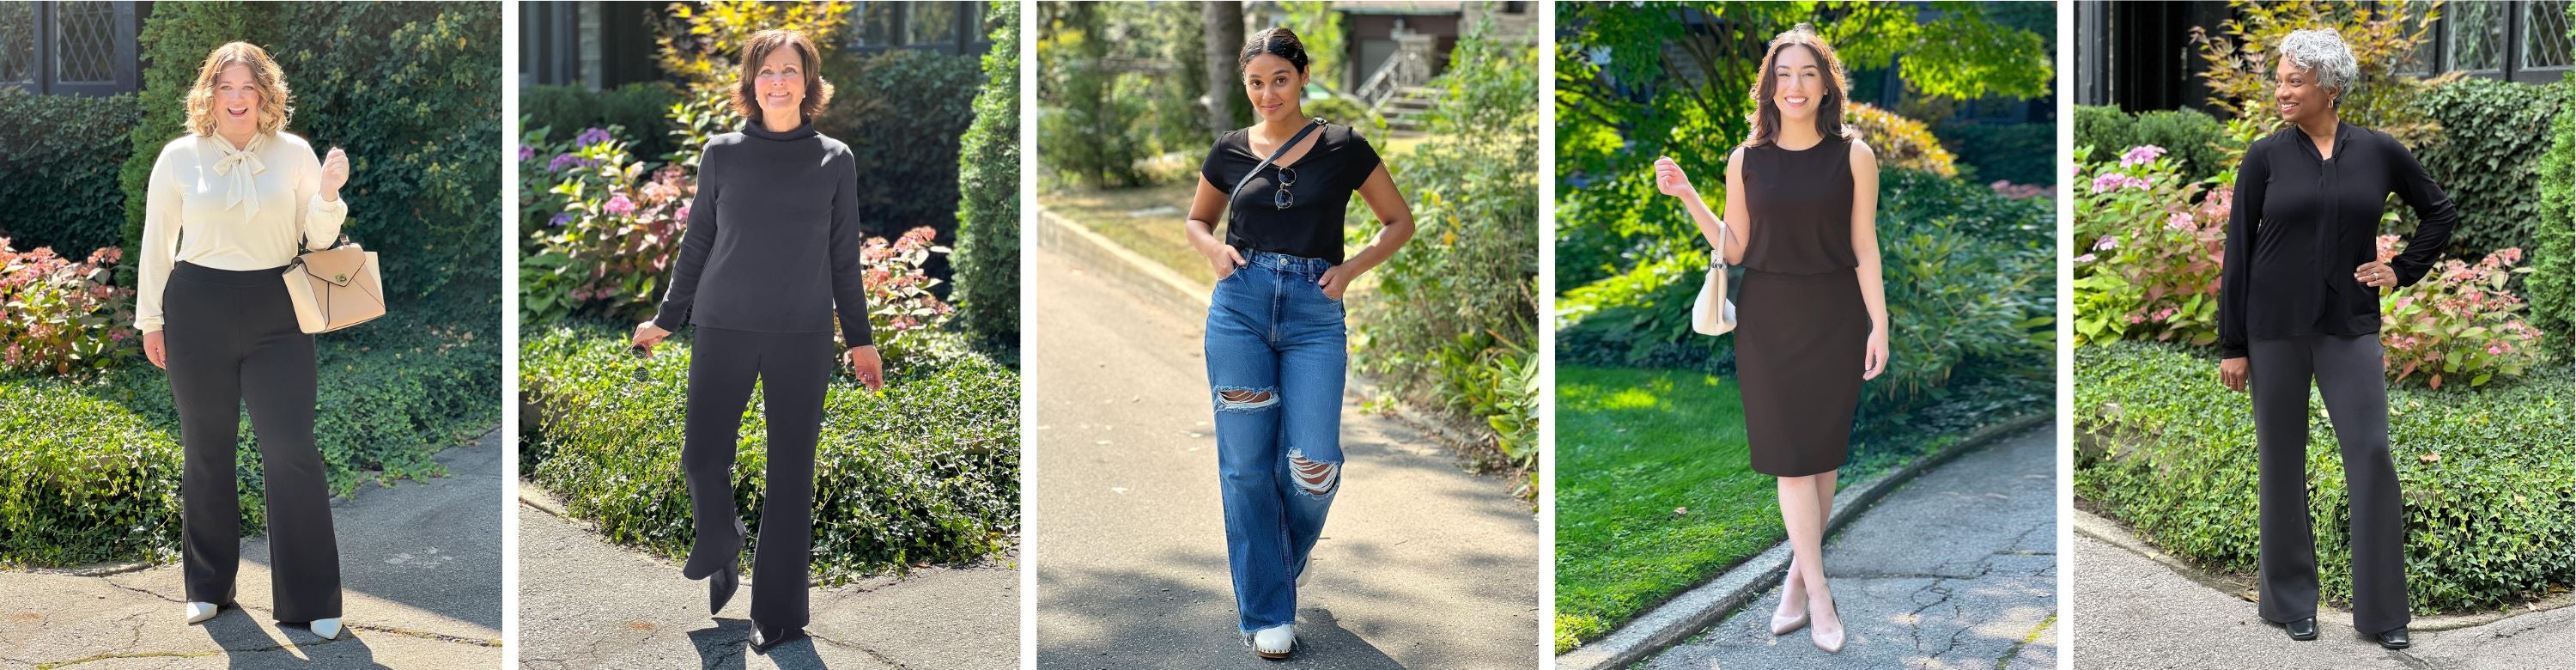 5 side by side images of Miik models showing different fall outfits